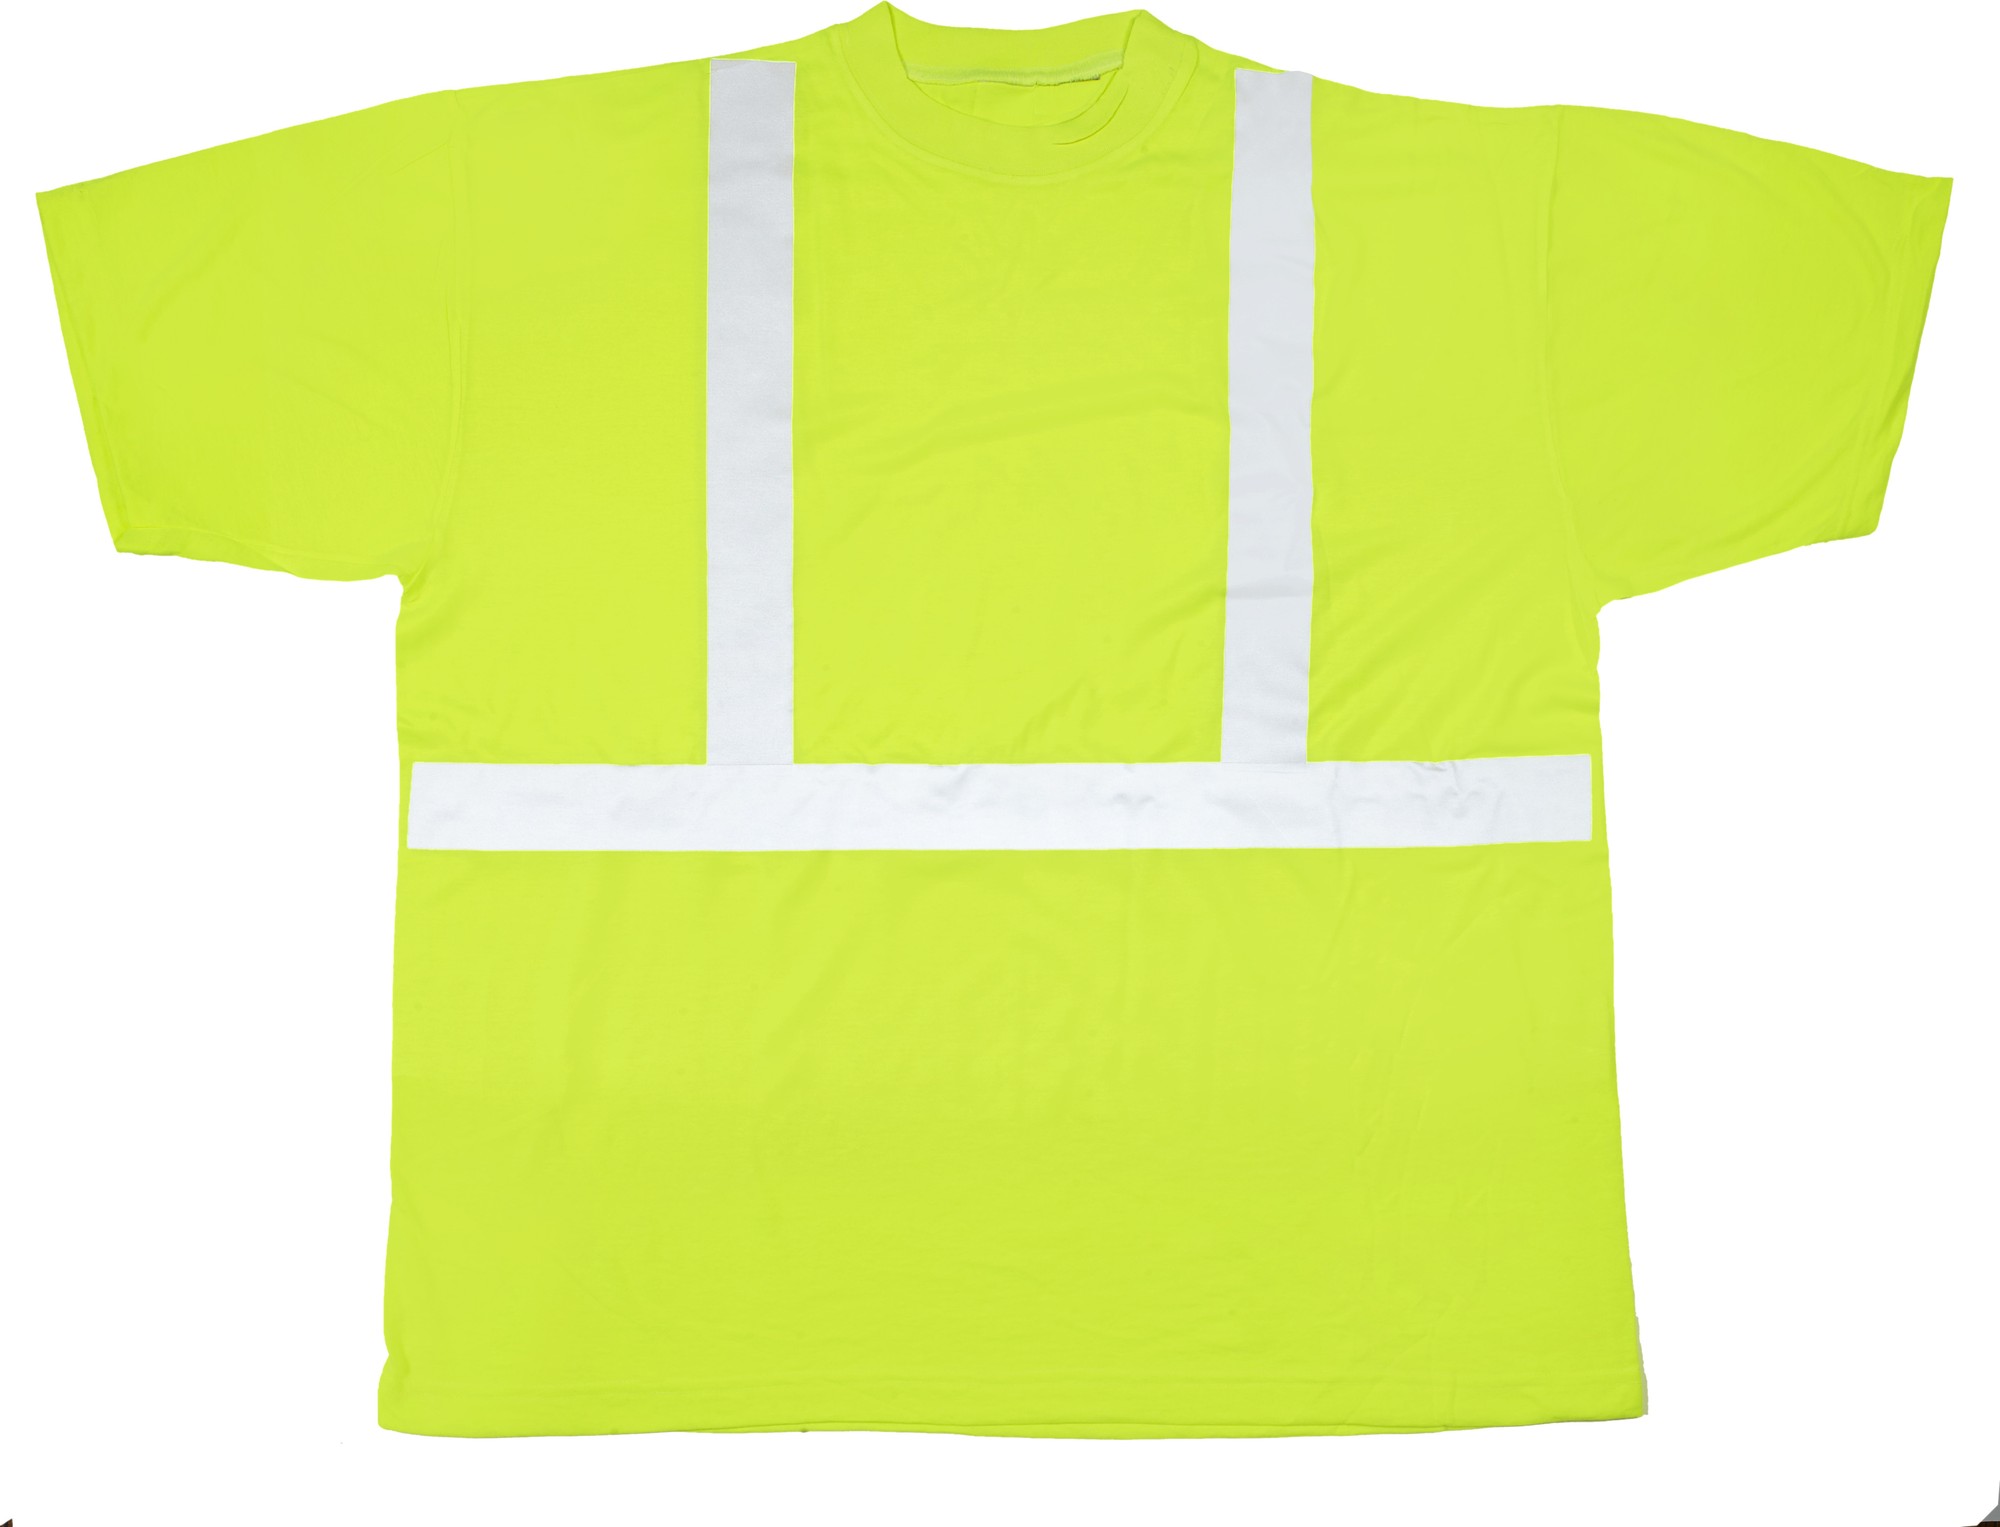 High Visibility Polyester ANSI Class 2 Safety Tee Shirt with 2" Reflective Silver Stripes, X-Large, Lime